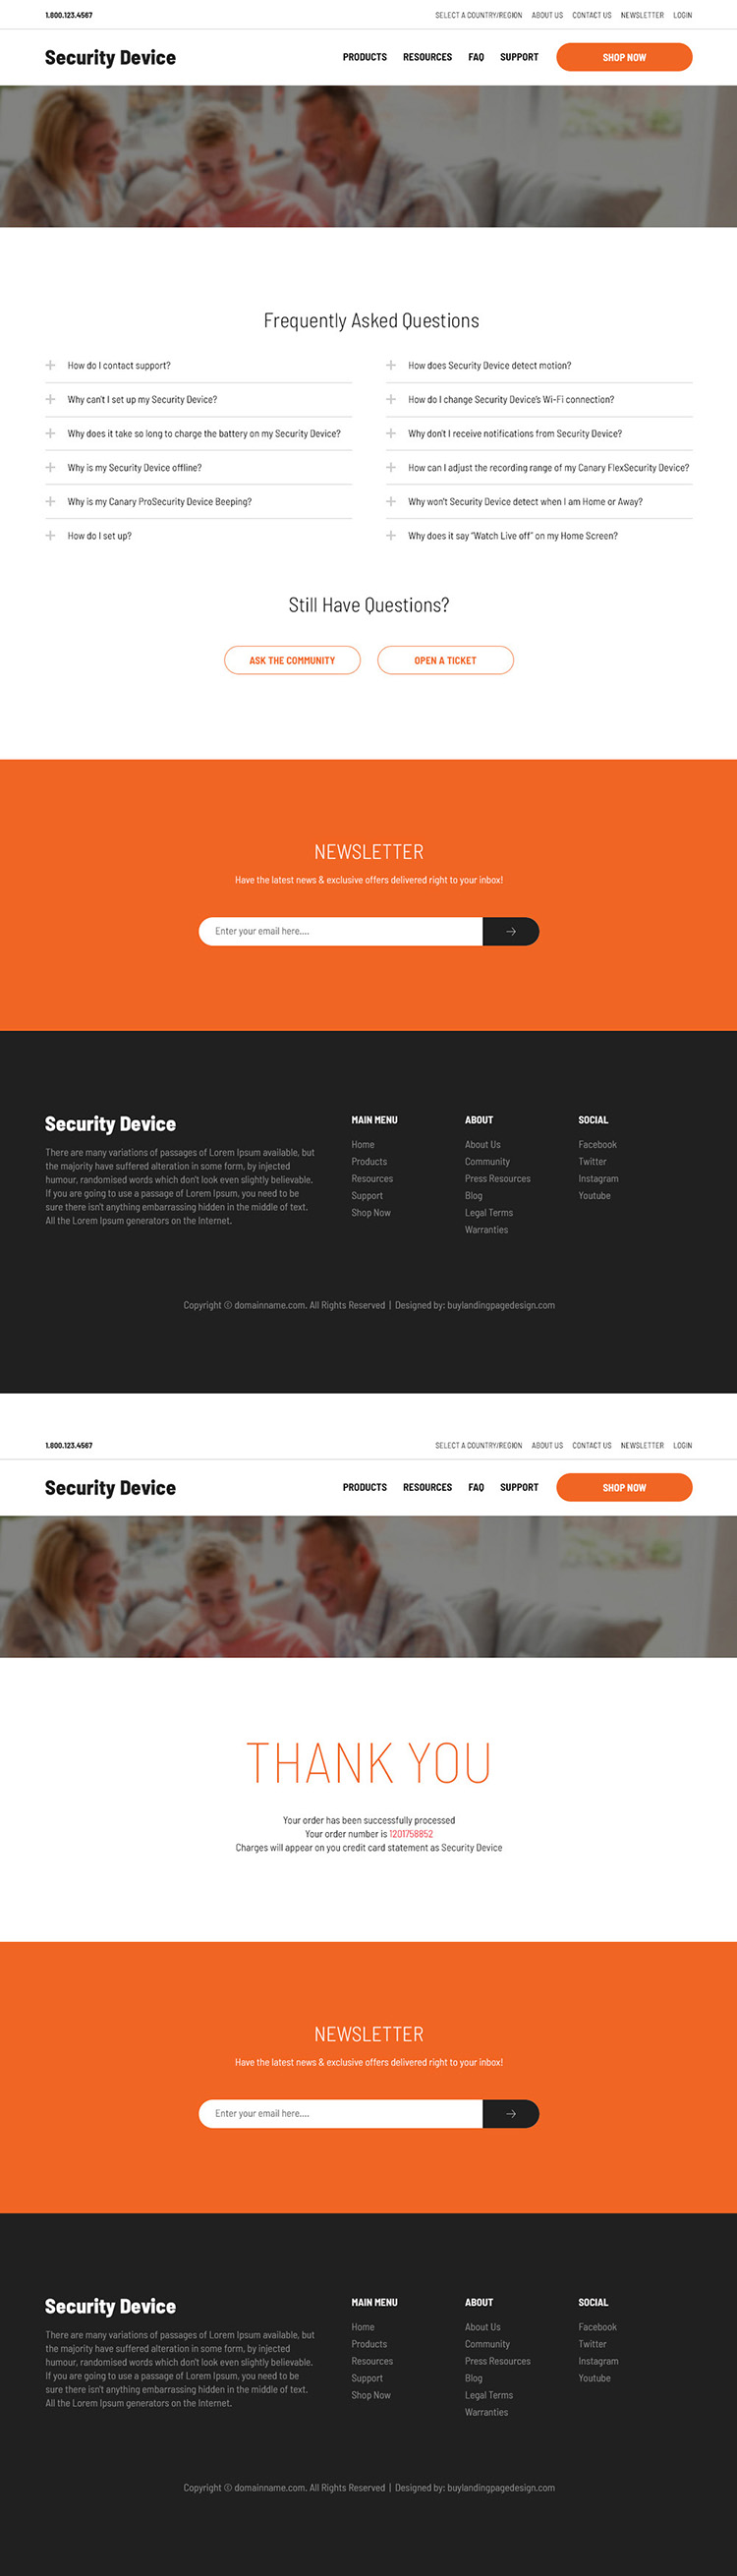 security products responsive website design